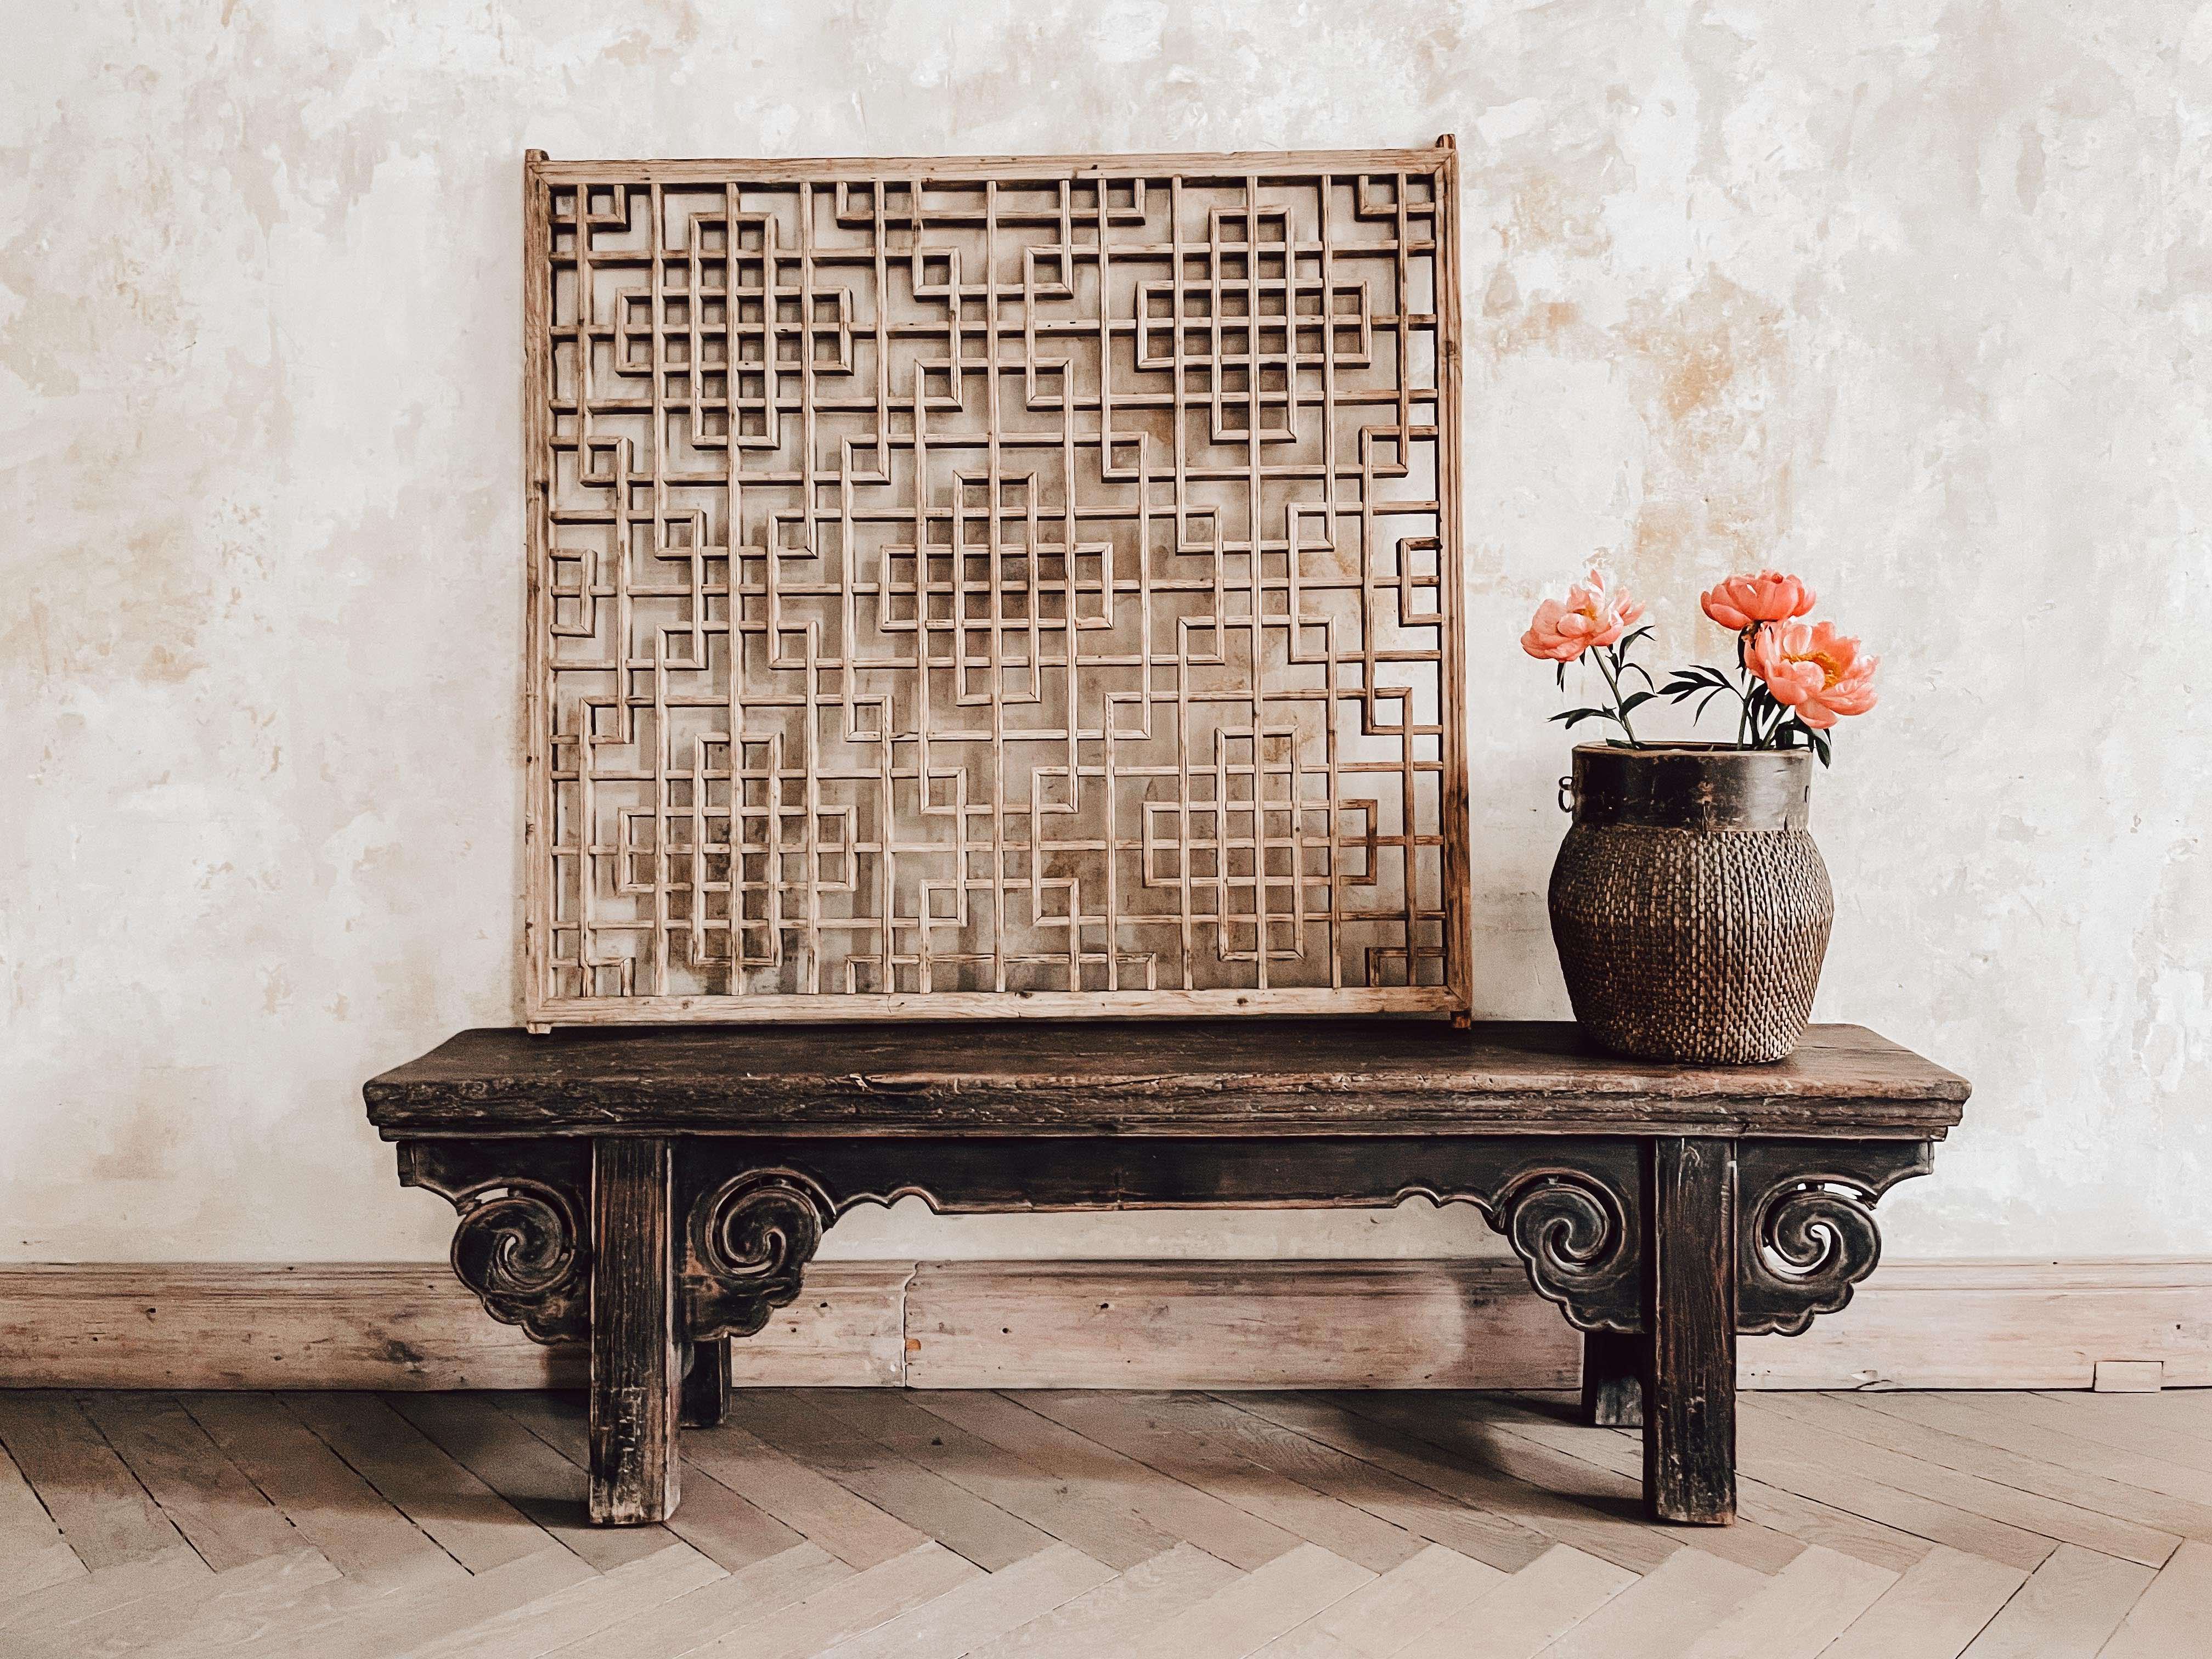 Old Chinese wooden bench